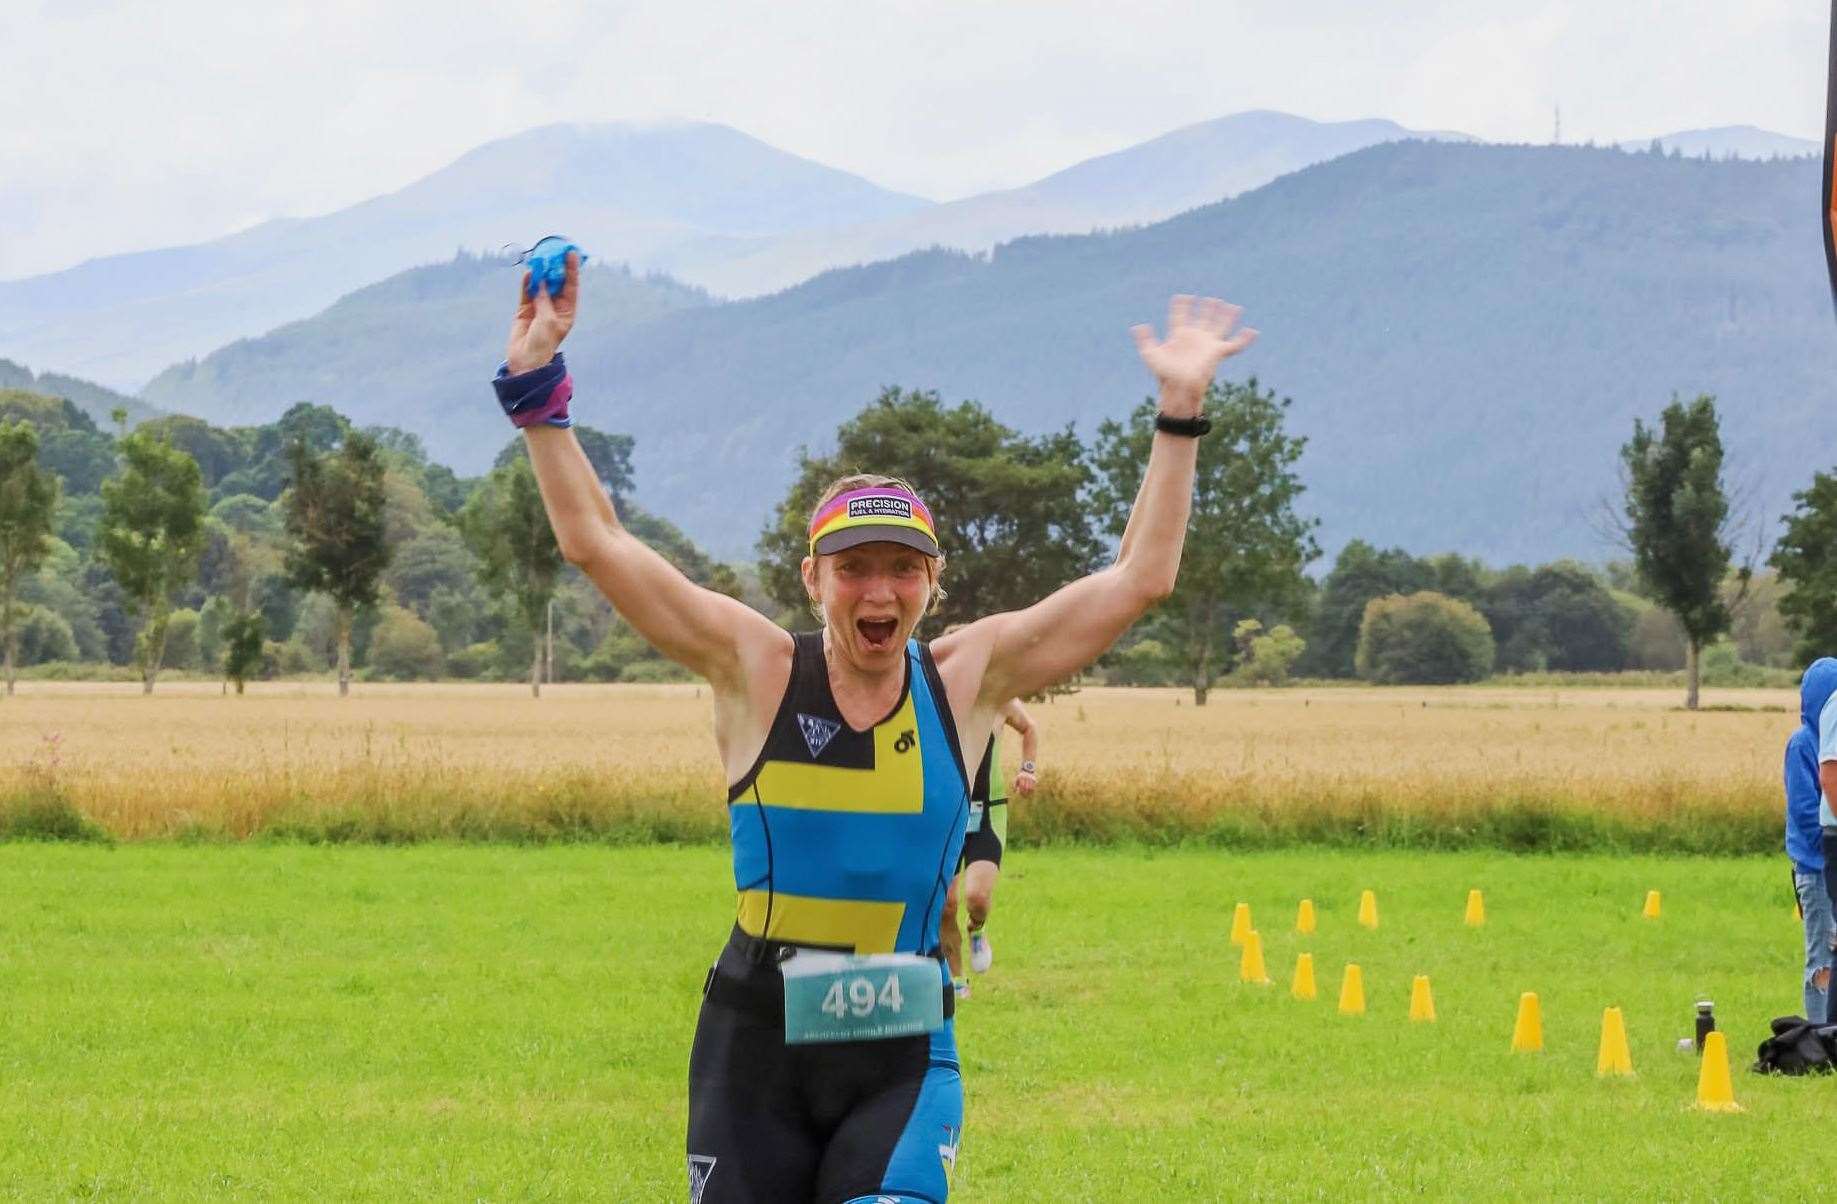 Debbie Larnach shows her delight at becoming the Scottish champion in her age group at the Scottish National Middle-Distance Championships.